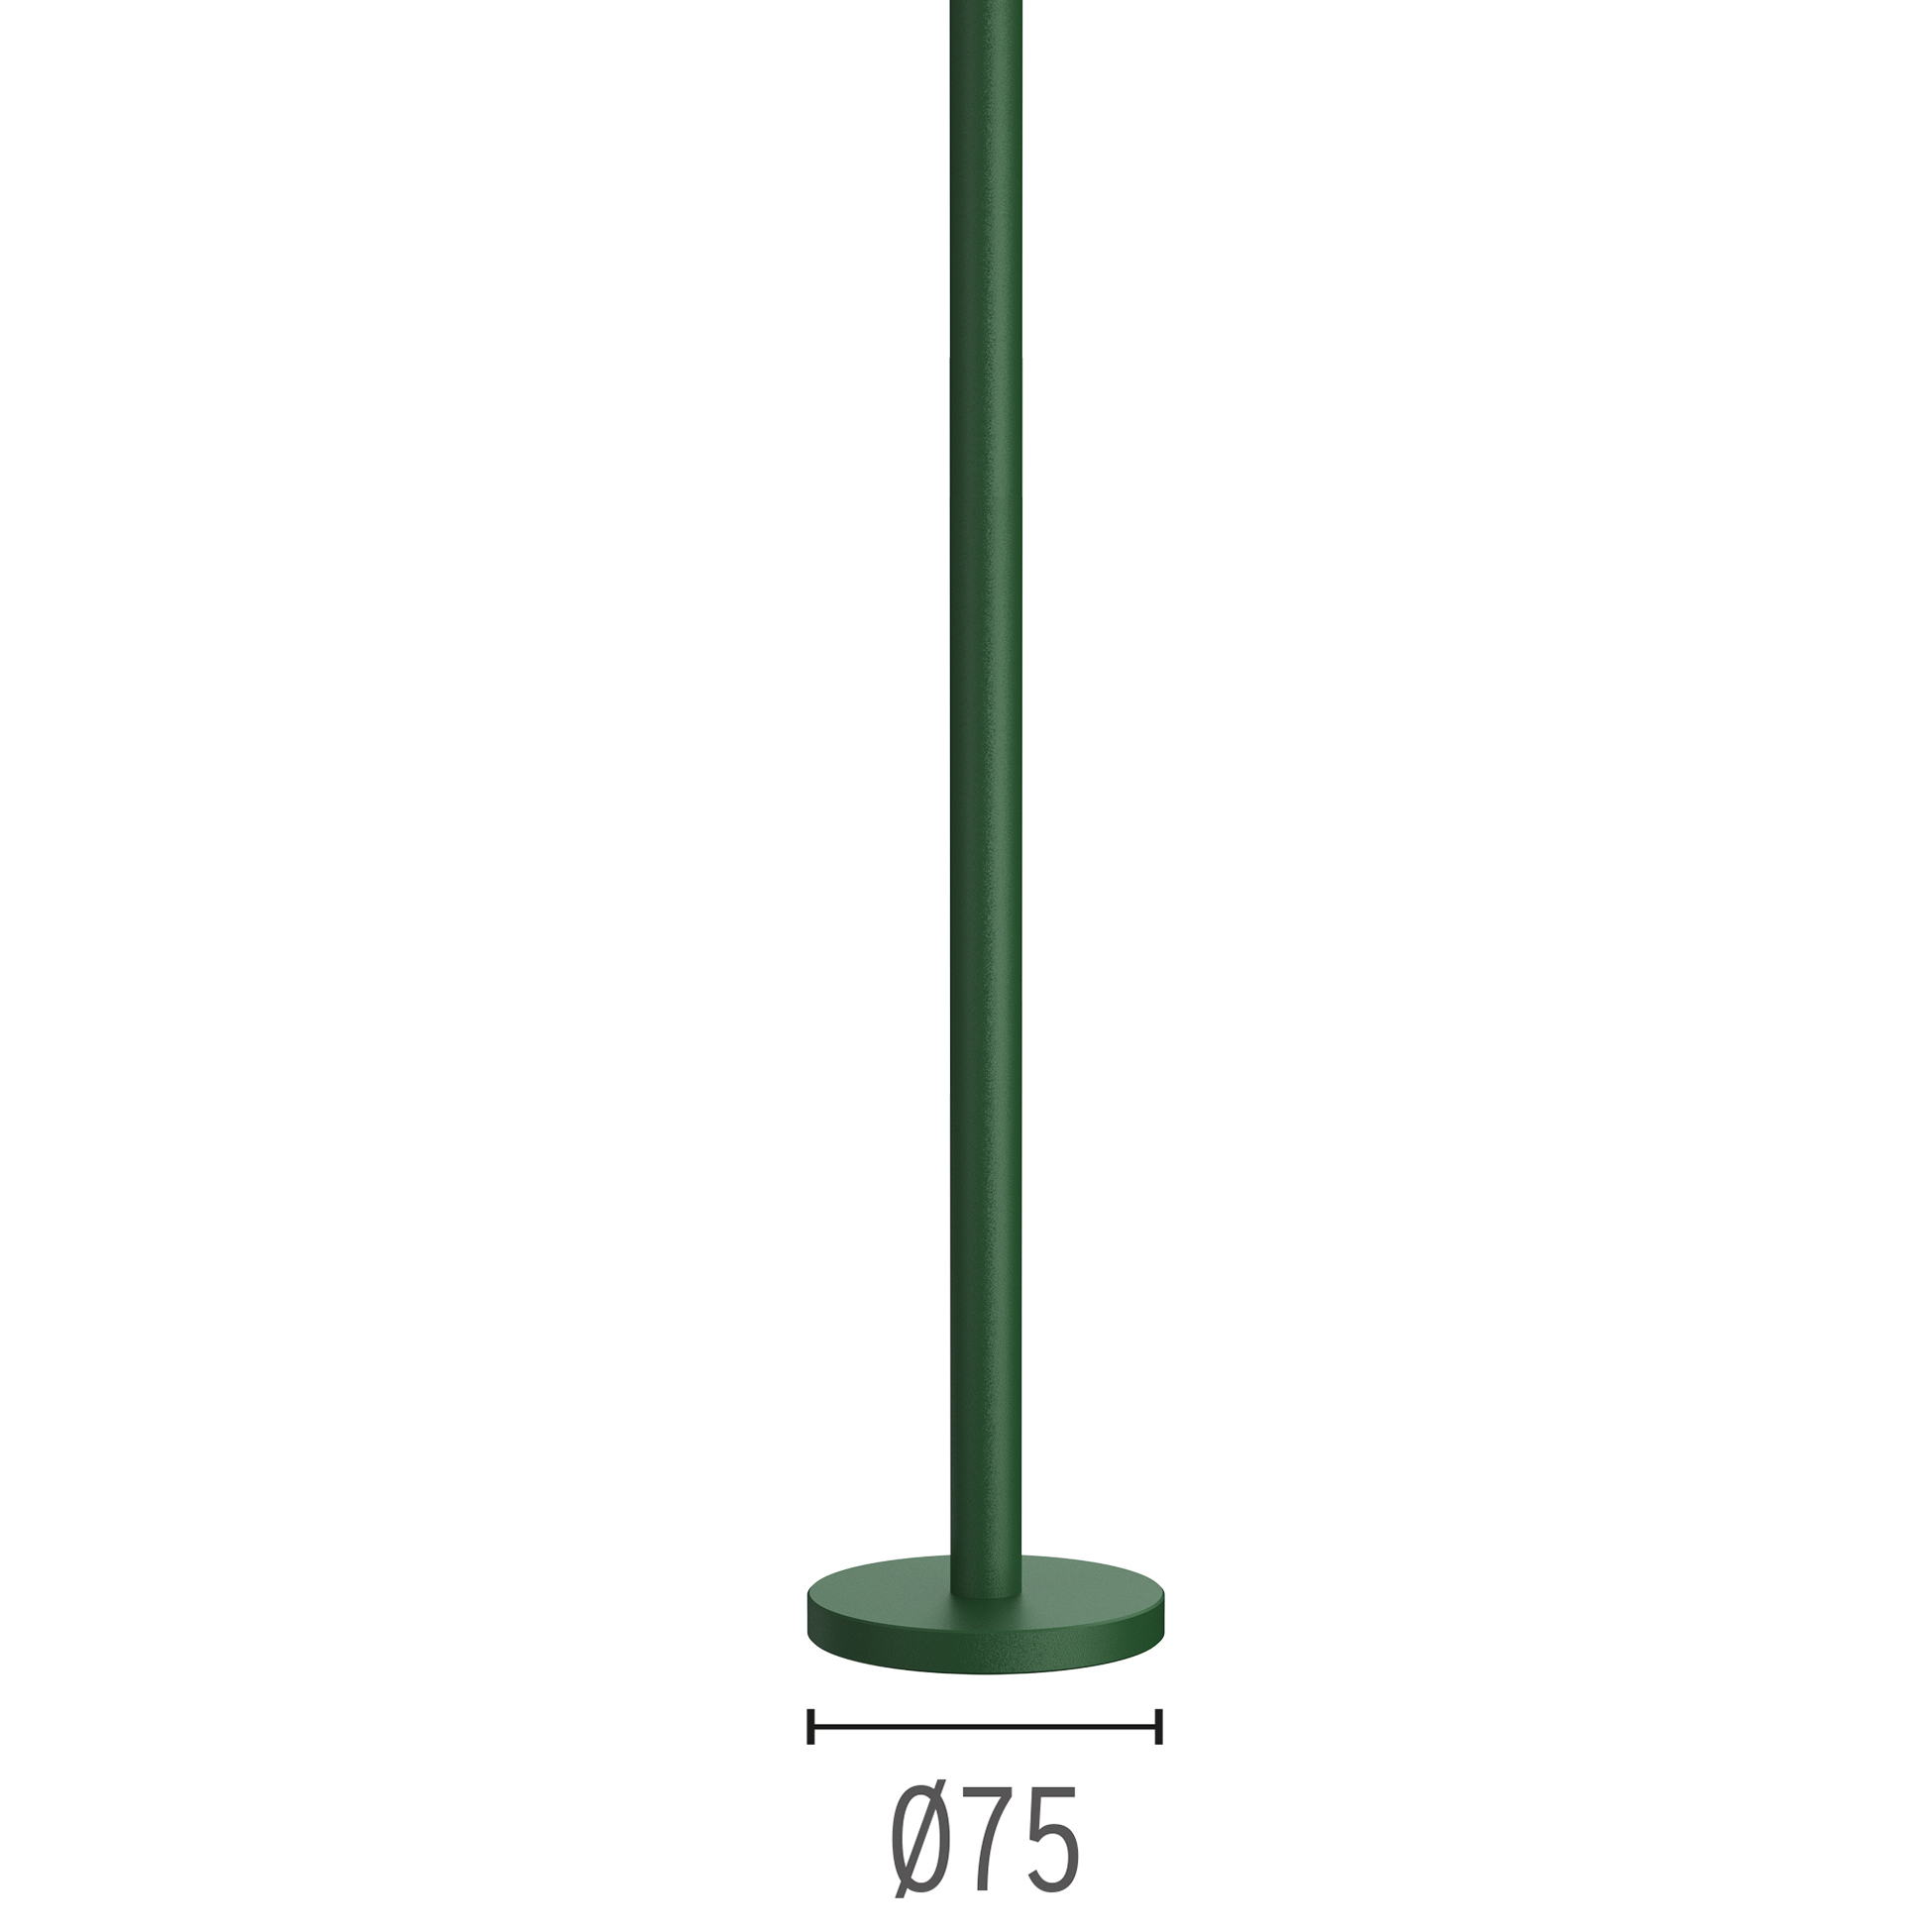 Pole%20with%20Base%20Landlord-FOREST-GREEN-1950x1950.jpg